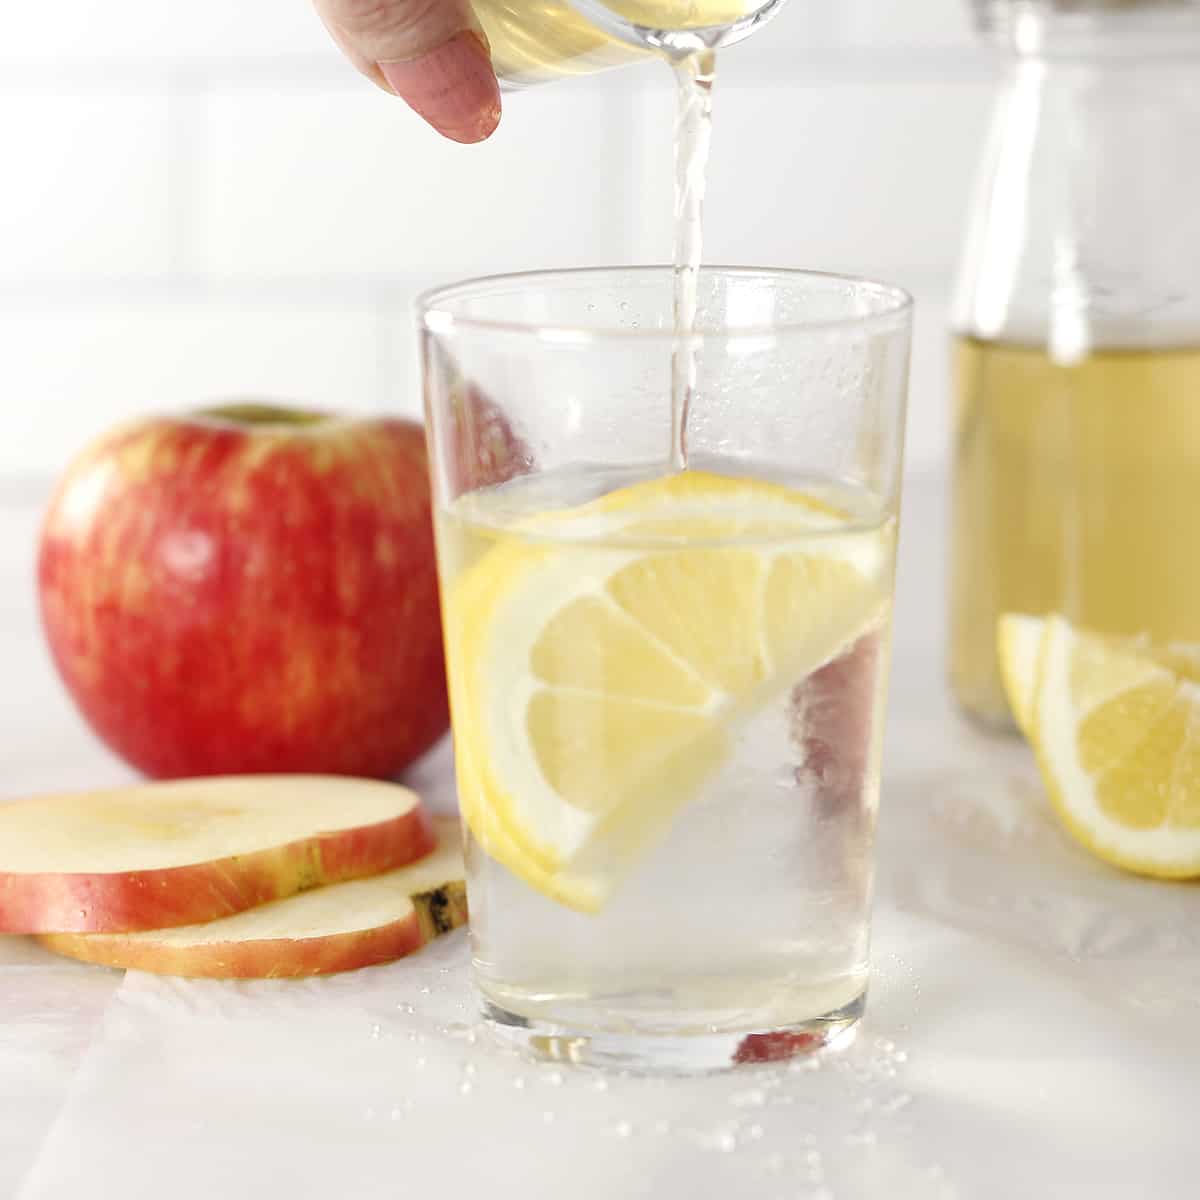 apple cider vinegar drink with an apple and frother